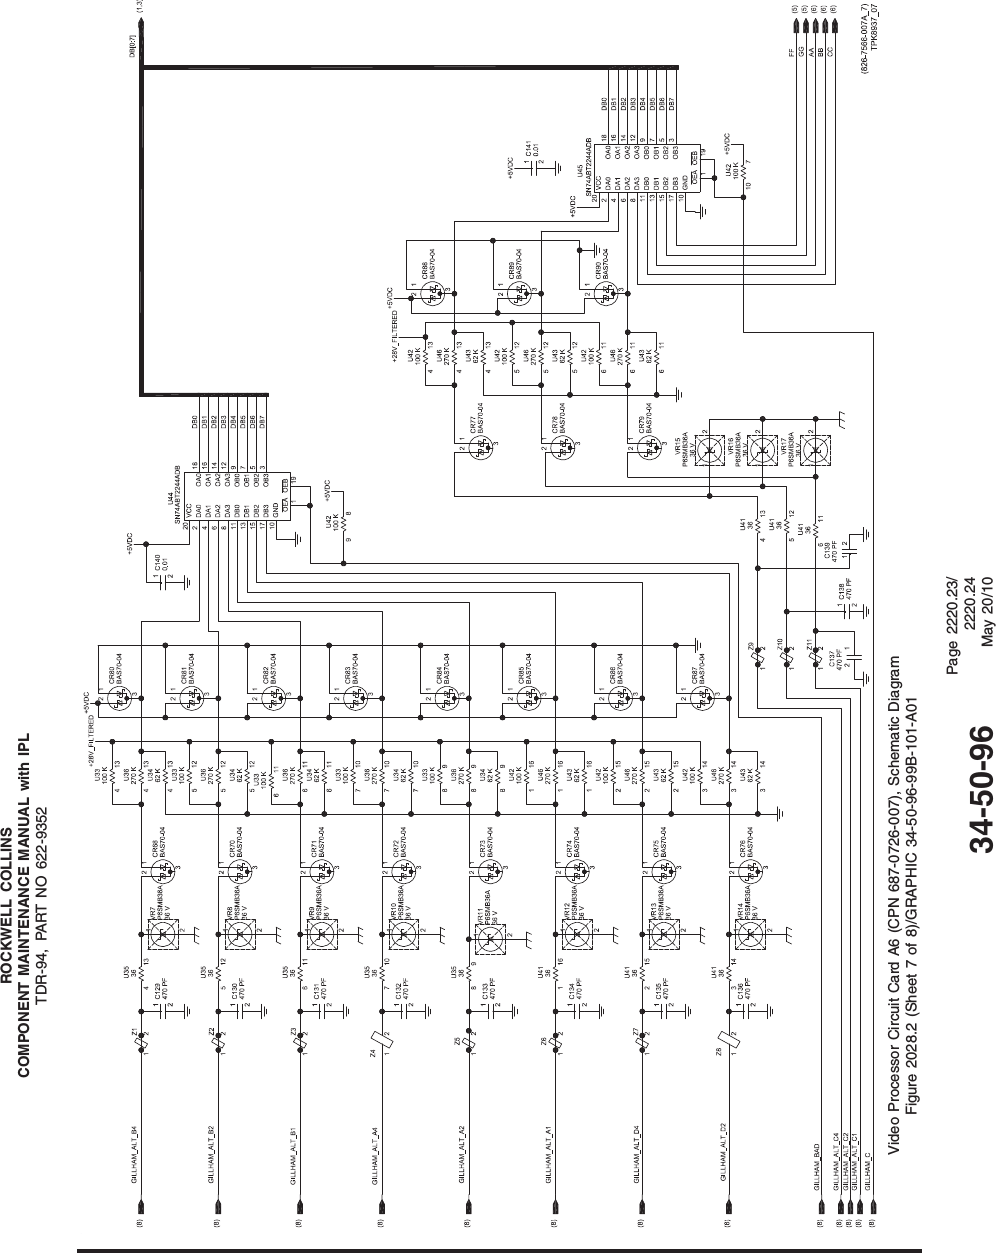 ROCKWELL COLLINSCOMPONENT MAINTENANCE MANUAL with IPLTDR-94, PART NO 622-9352Video Processor Circuit Card A6 (CPN 687-0726-007), Schematic DiagramFigure 2028.2 (Sheet 7 of 8)/GRAPHIC 34-50-96-99B-101-A0134-50-96Page 2220.23/2220.24May 20/10